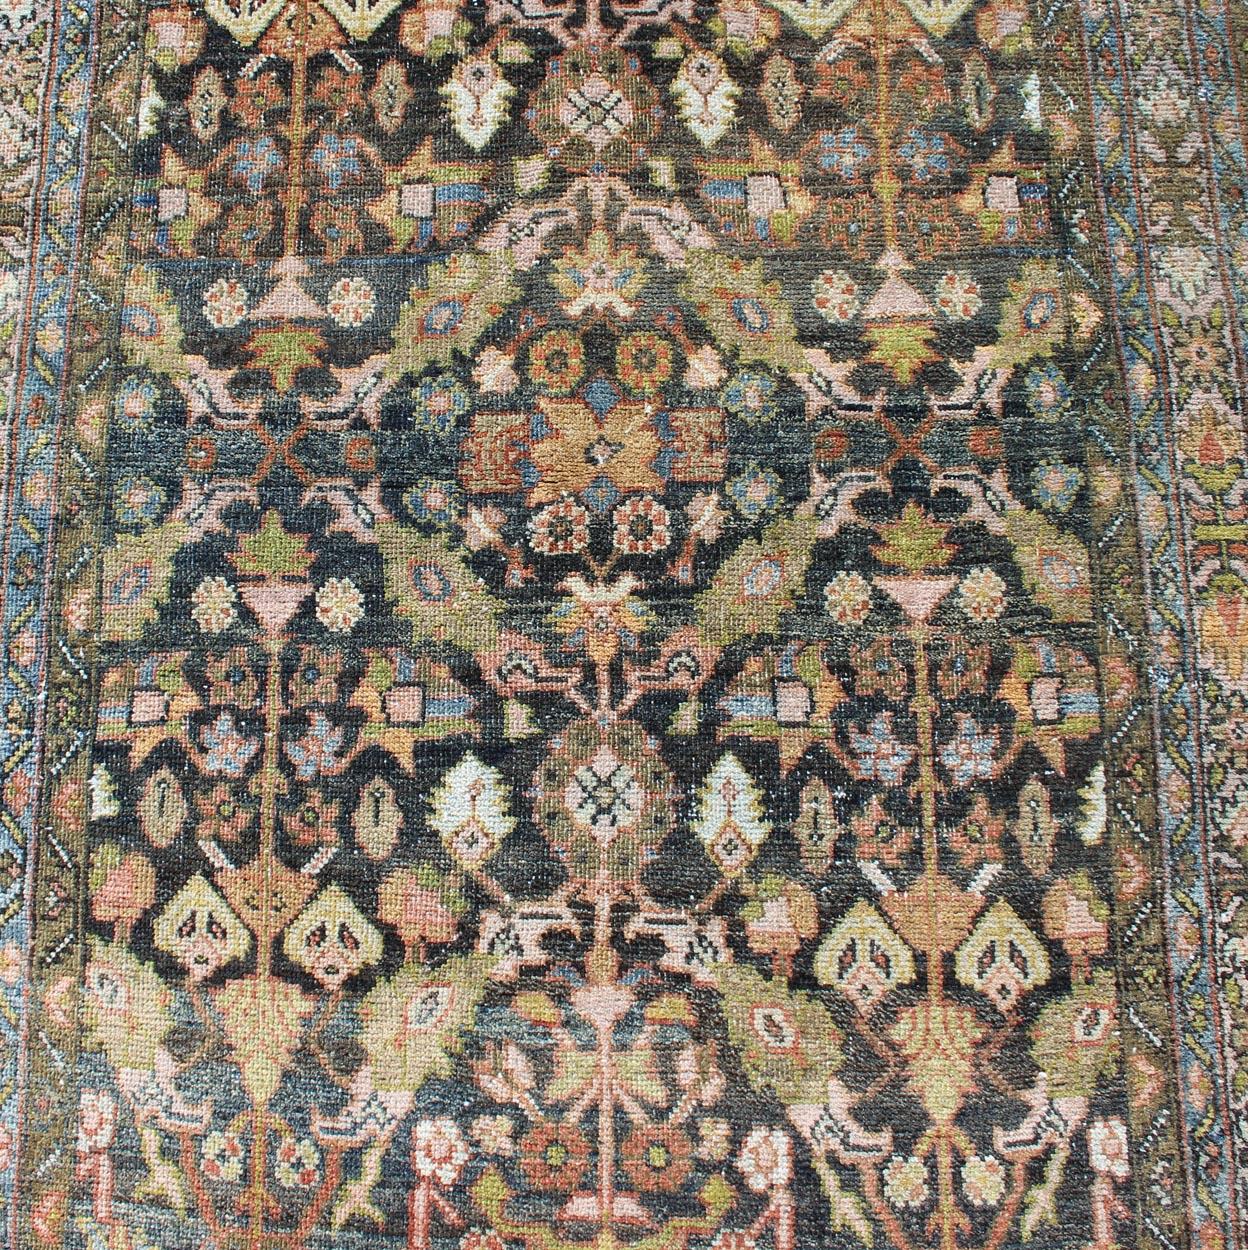 Early 20th Century Colorful Antique Persian Hamedan Runner with All-Over Floral Design